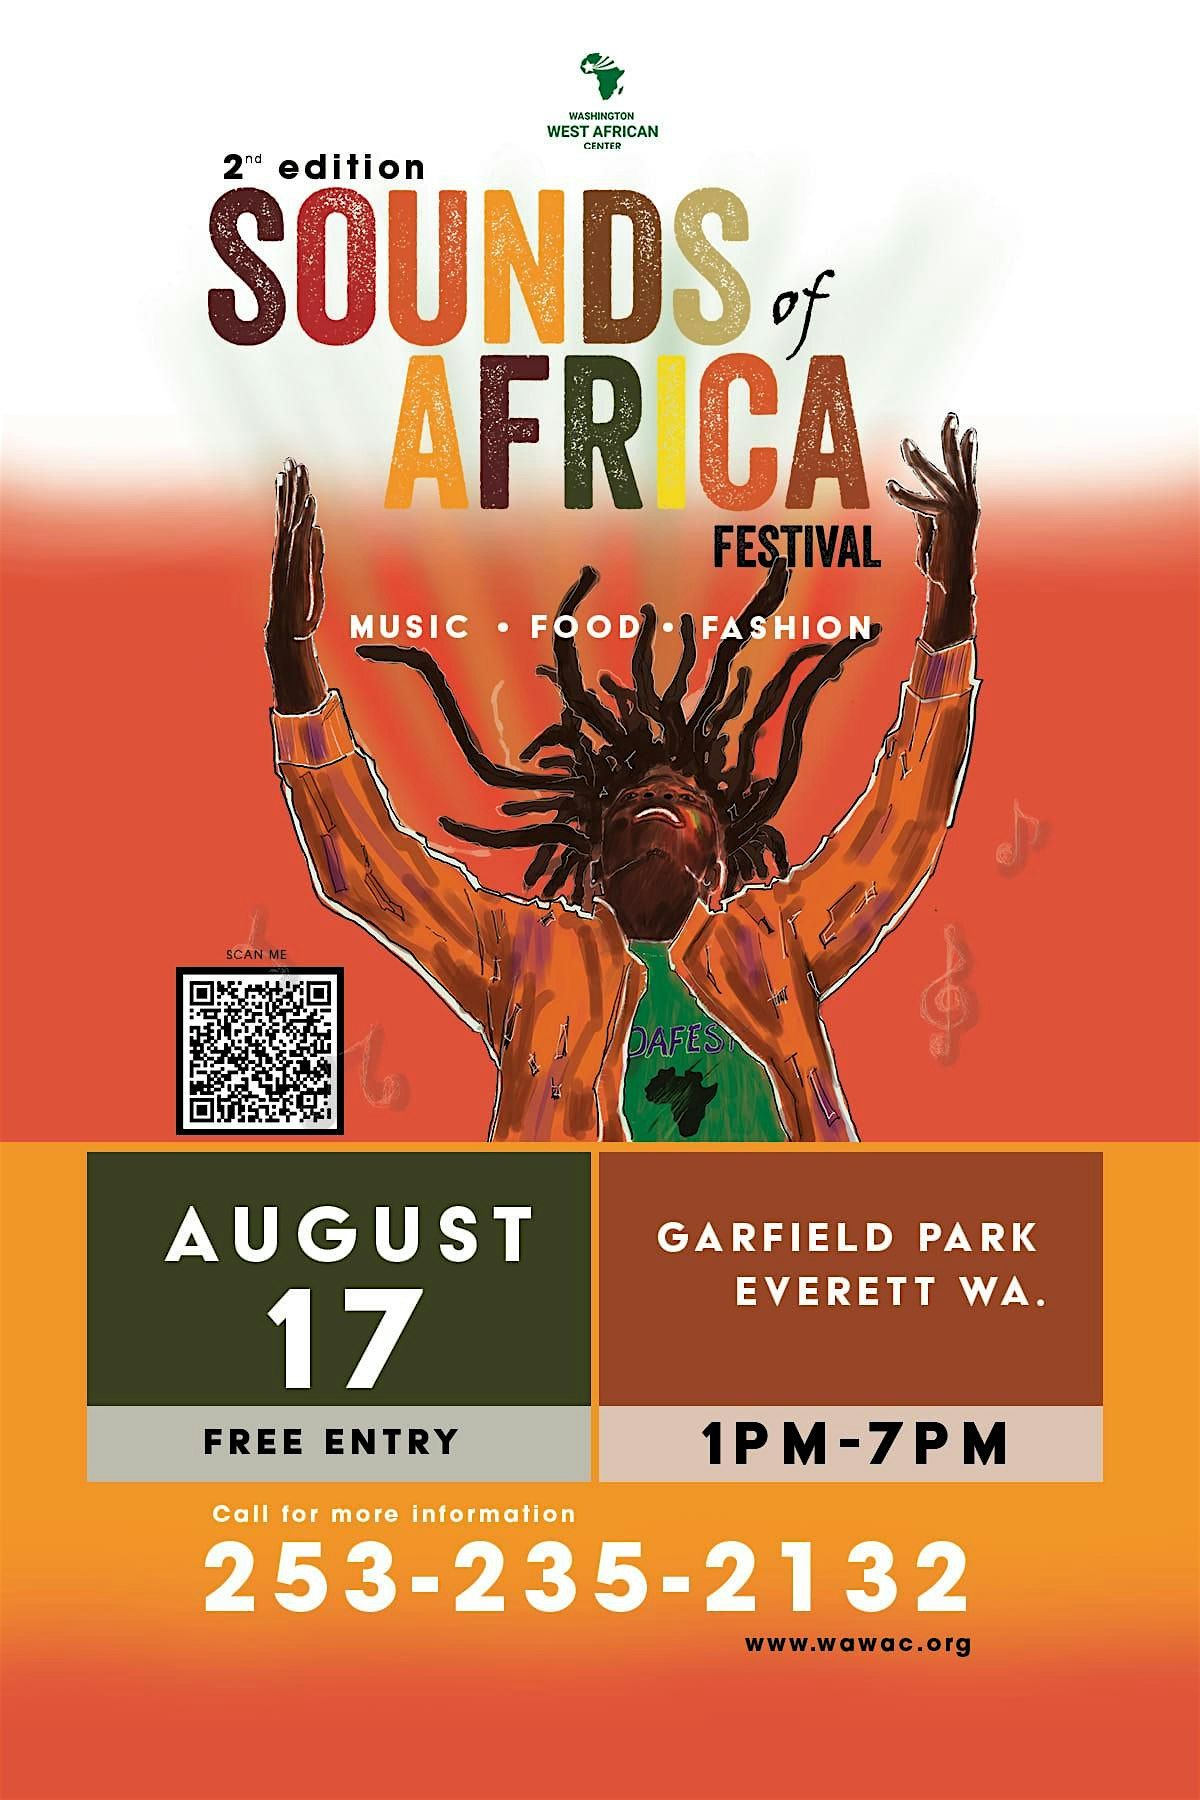 2nd ANNUAL SOUNDS OF AFRICA FESTIVAL